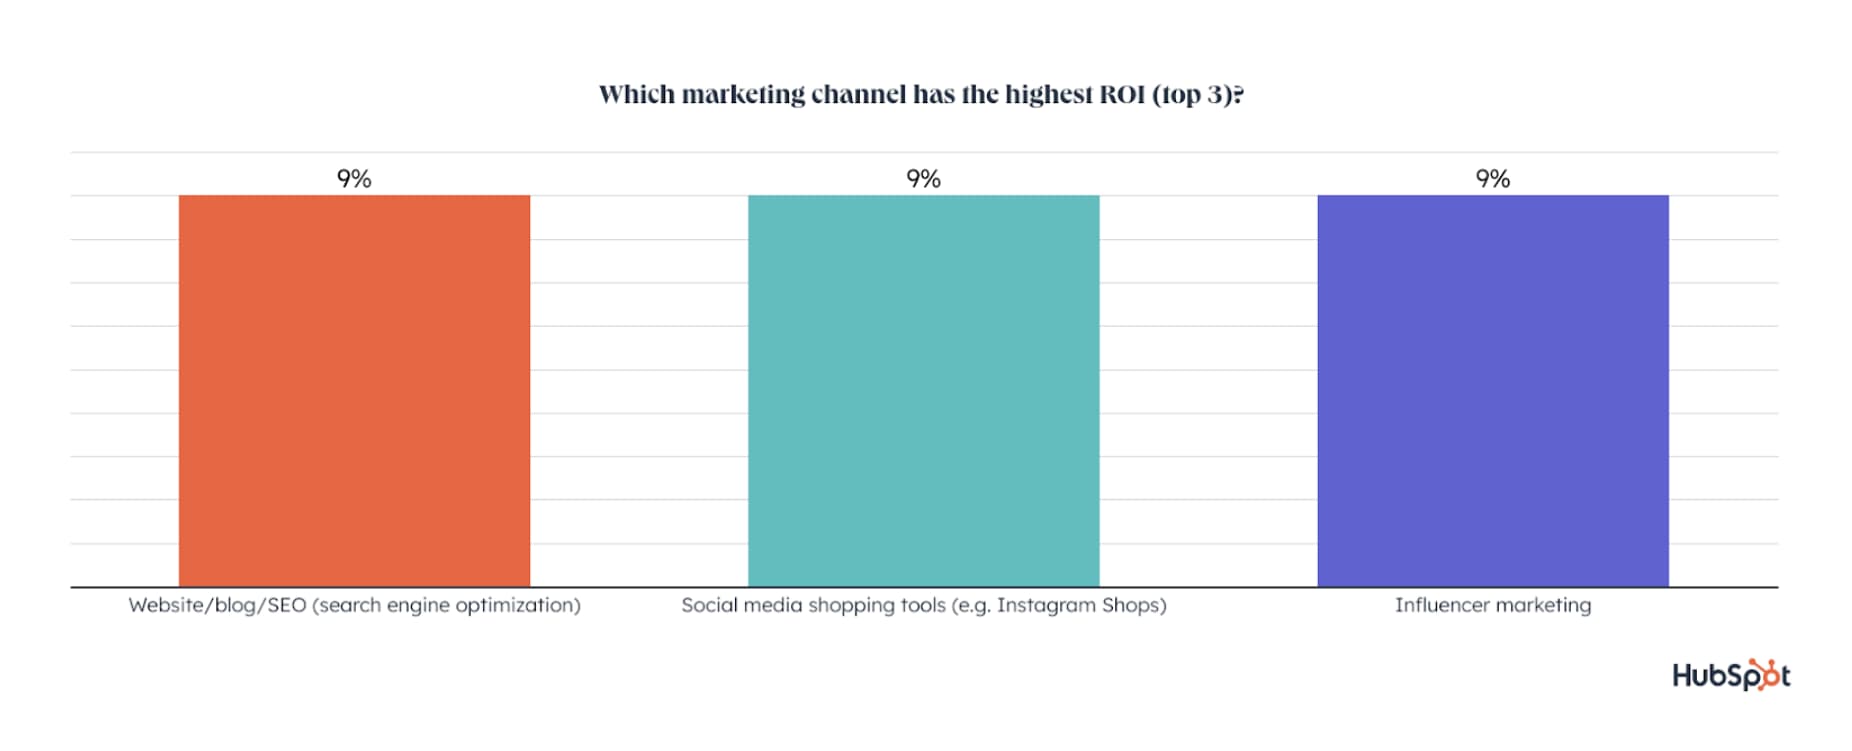 A chart graph showing blogging, social media shopping tools, and influencer marketing all tied for highest ROI